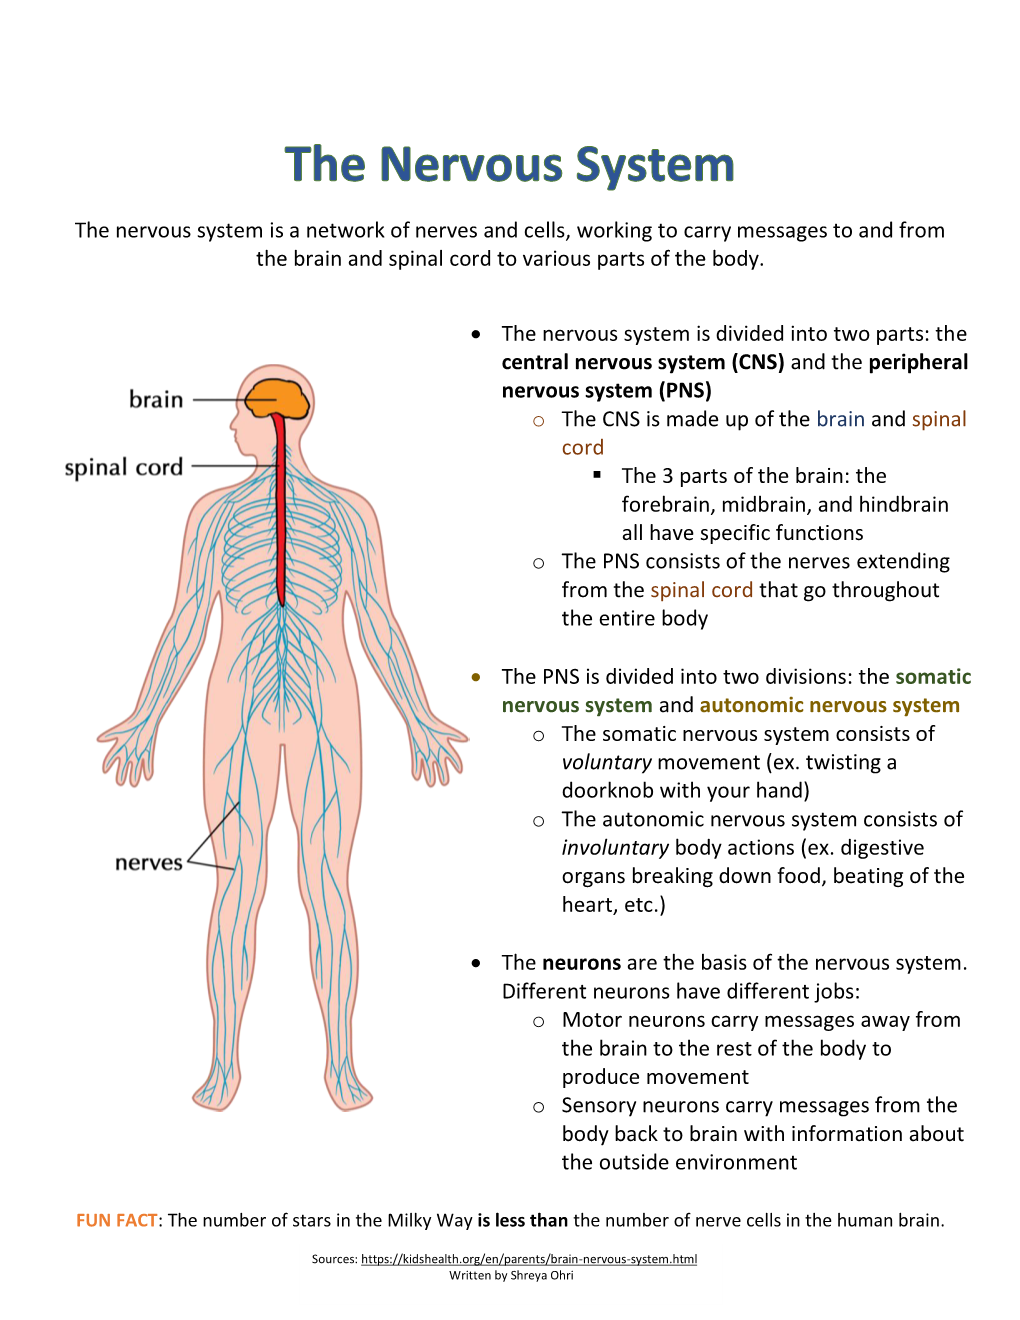 The Nervous System Is a Network of Nerves and Cells, Working to Carry Messages to and from the Brain and Spinal Cord to Various Parts of the Body